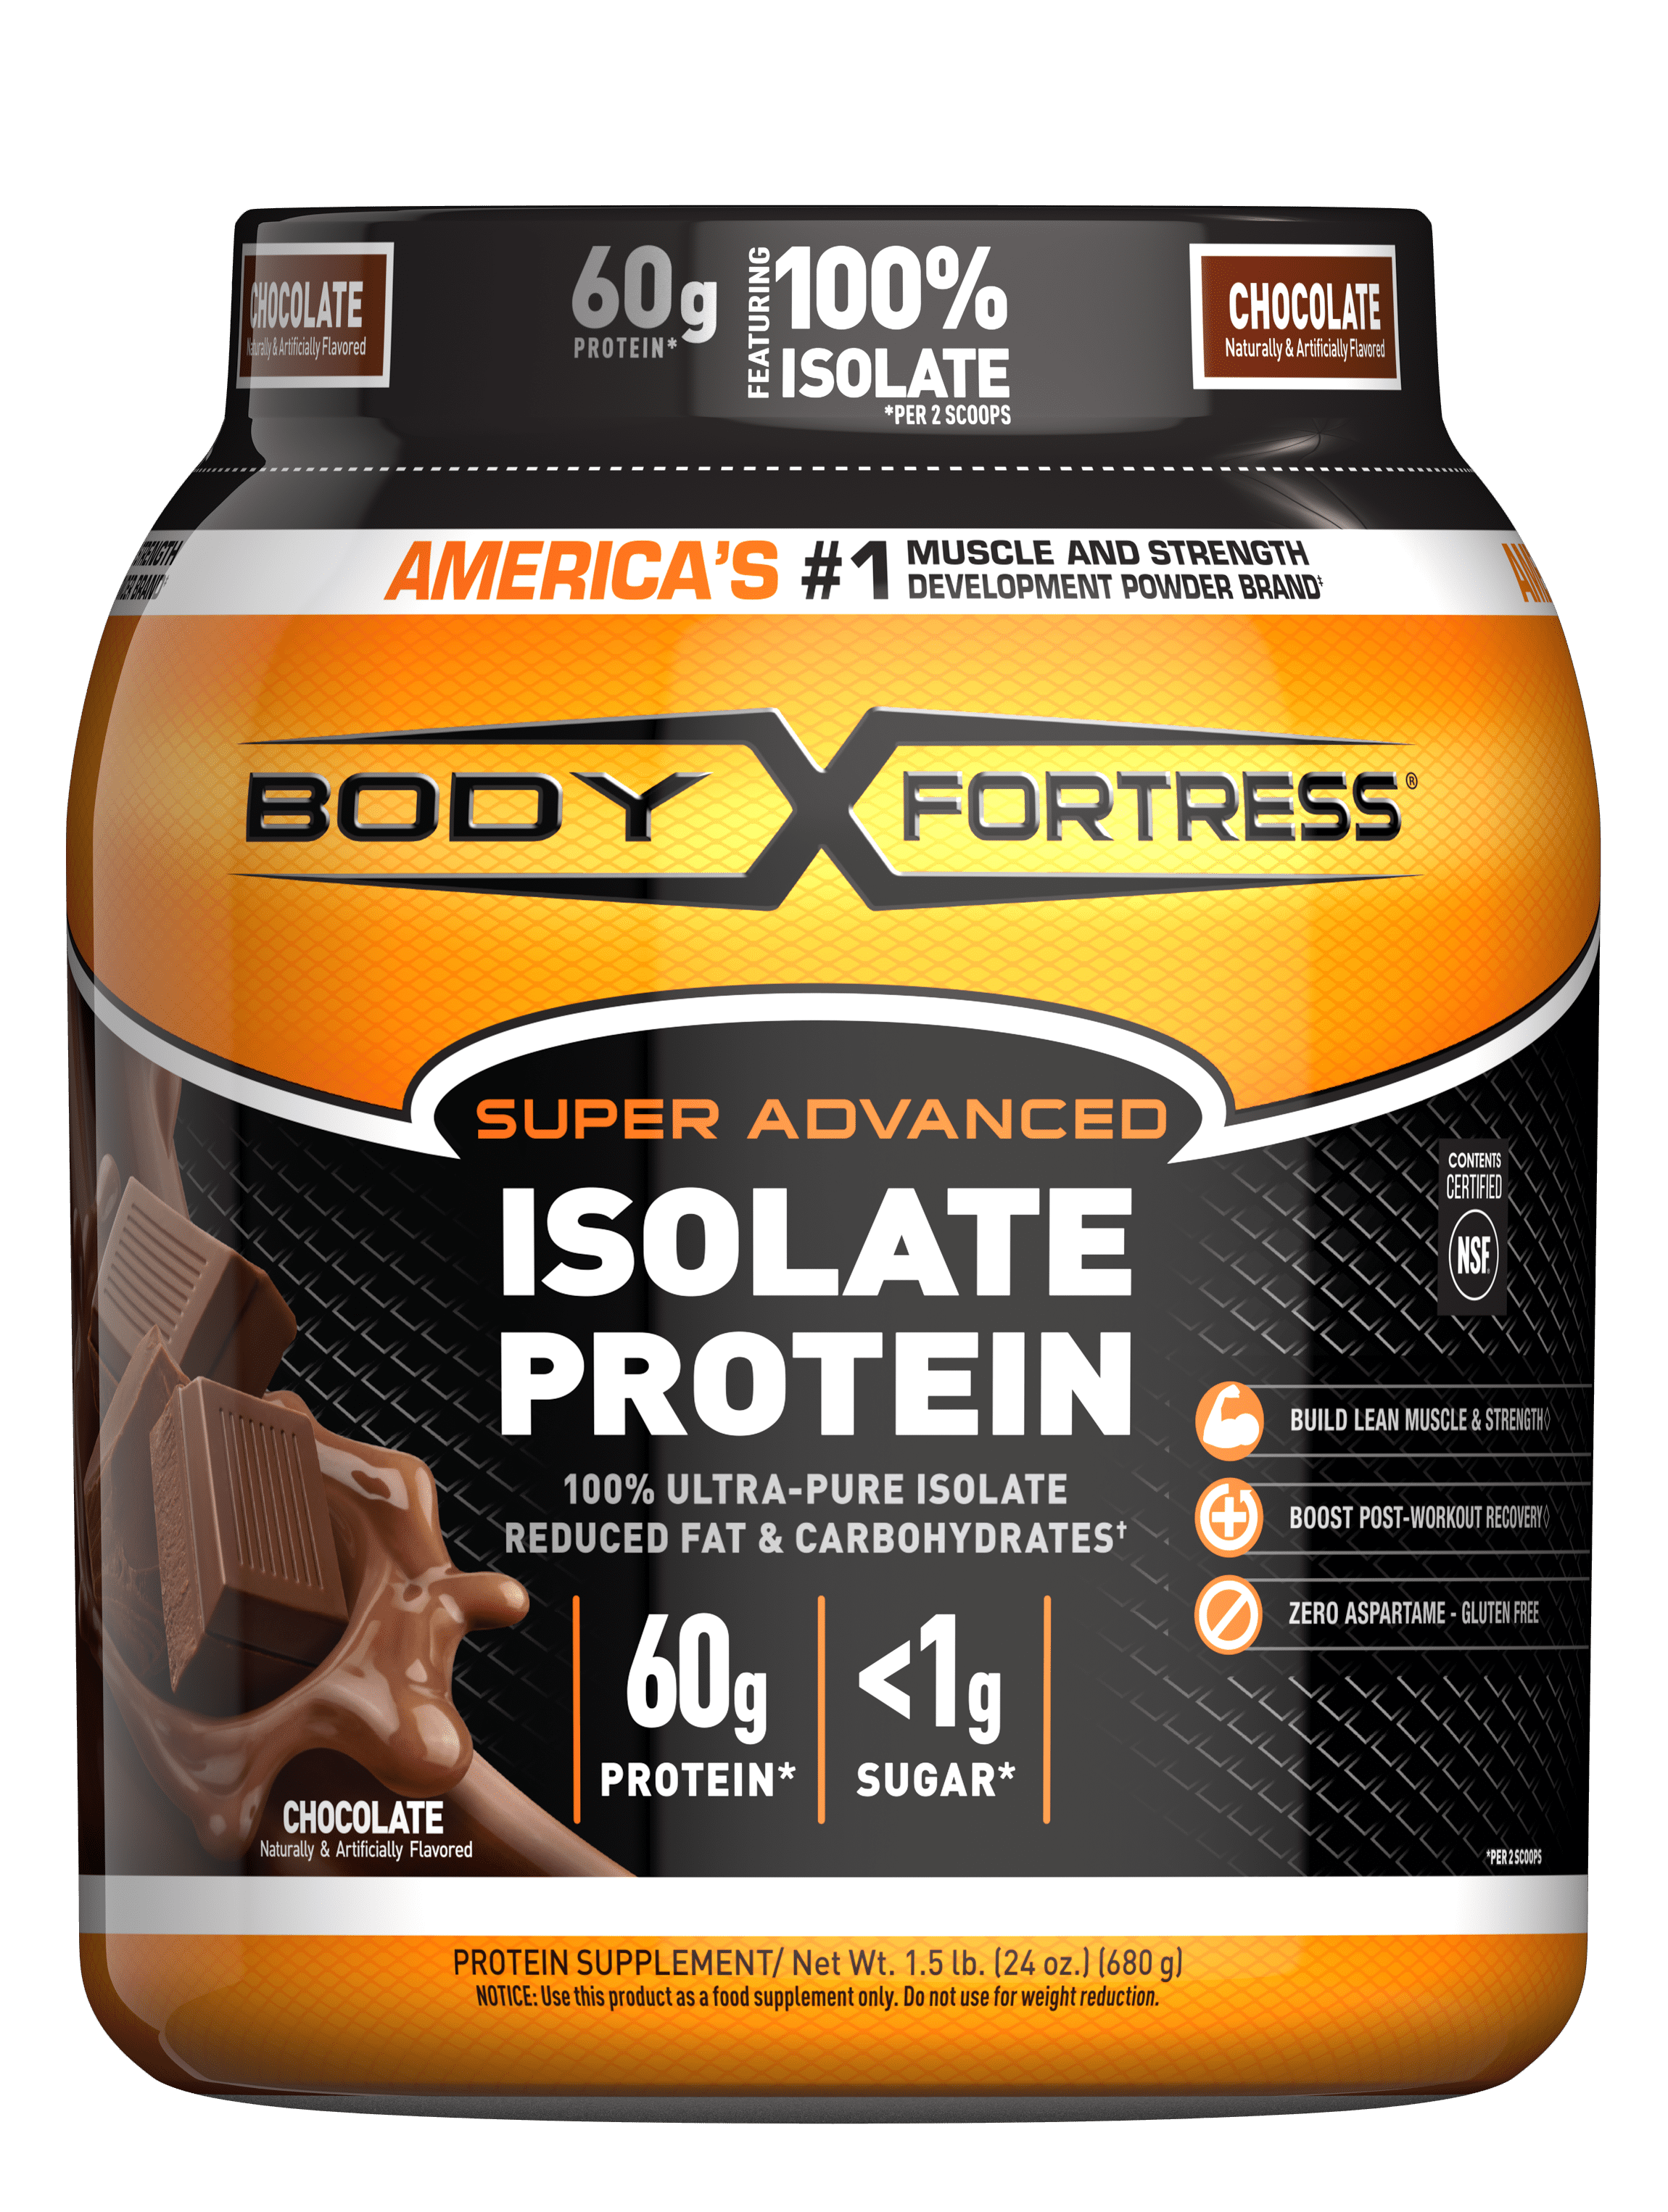 Body Fortress Super Advanced Isolate Protein, Chocolate, Protein Powder Supplement, Reduced Fat & Carbohydrates, 1.5 lb Jar (Packaging May Vary)